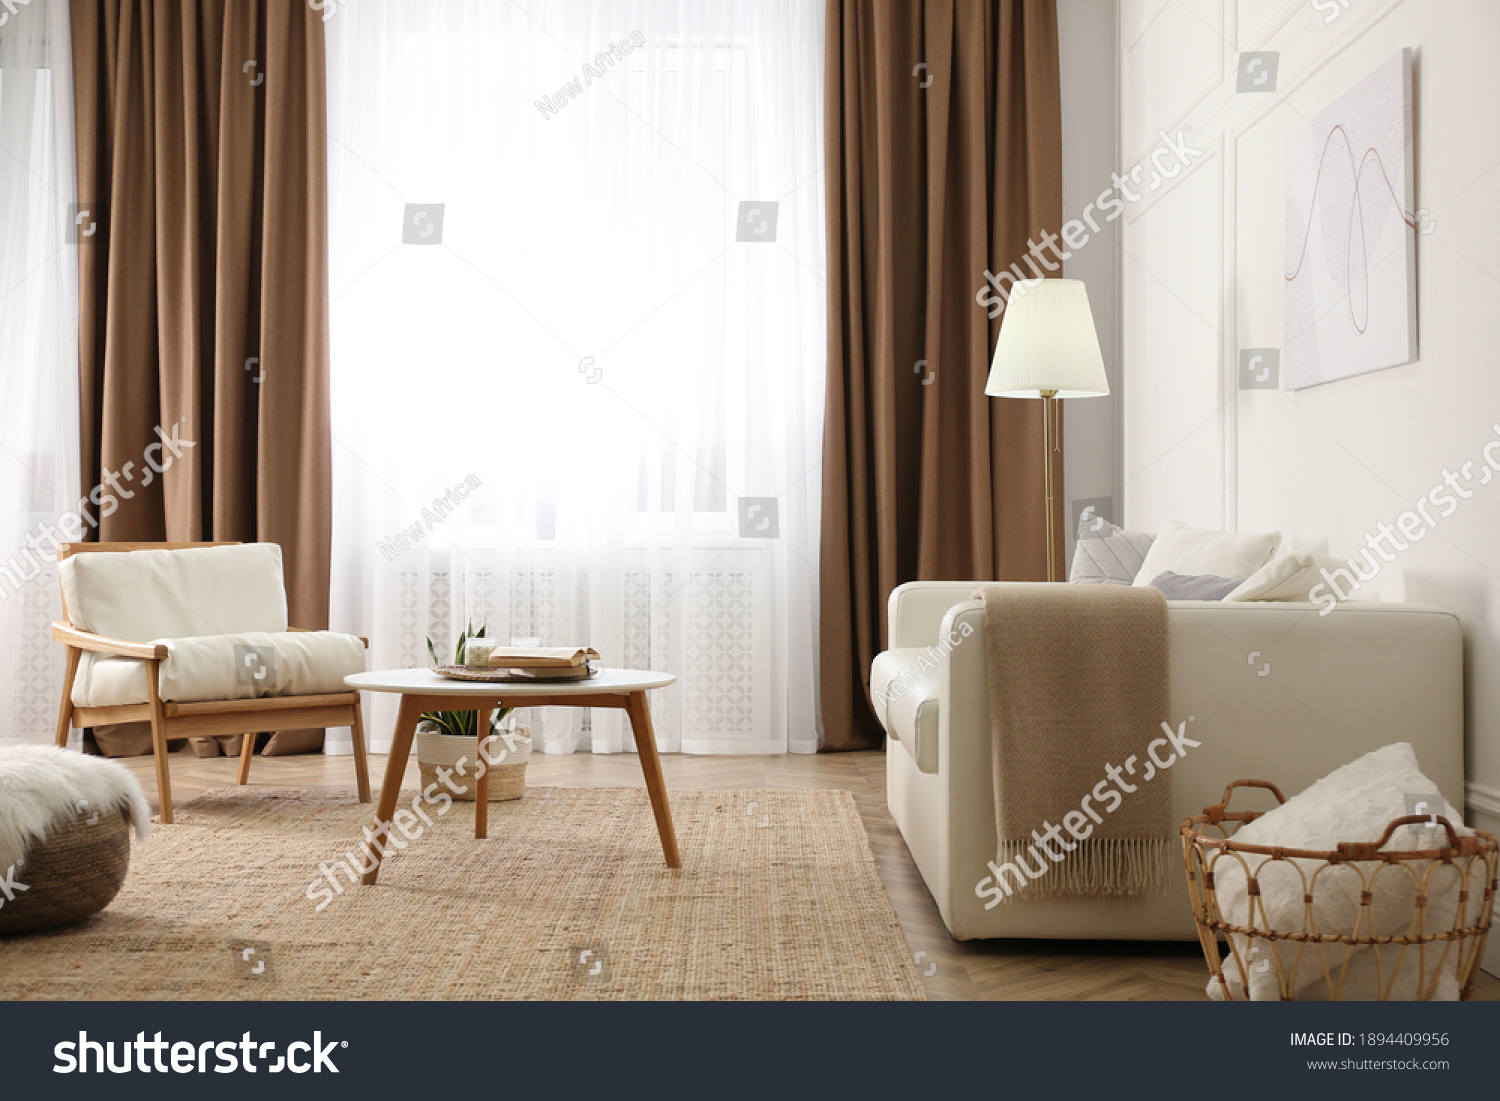 Modern furniture and window with curtains in stylish room interior #1894409956